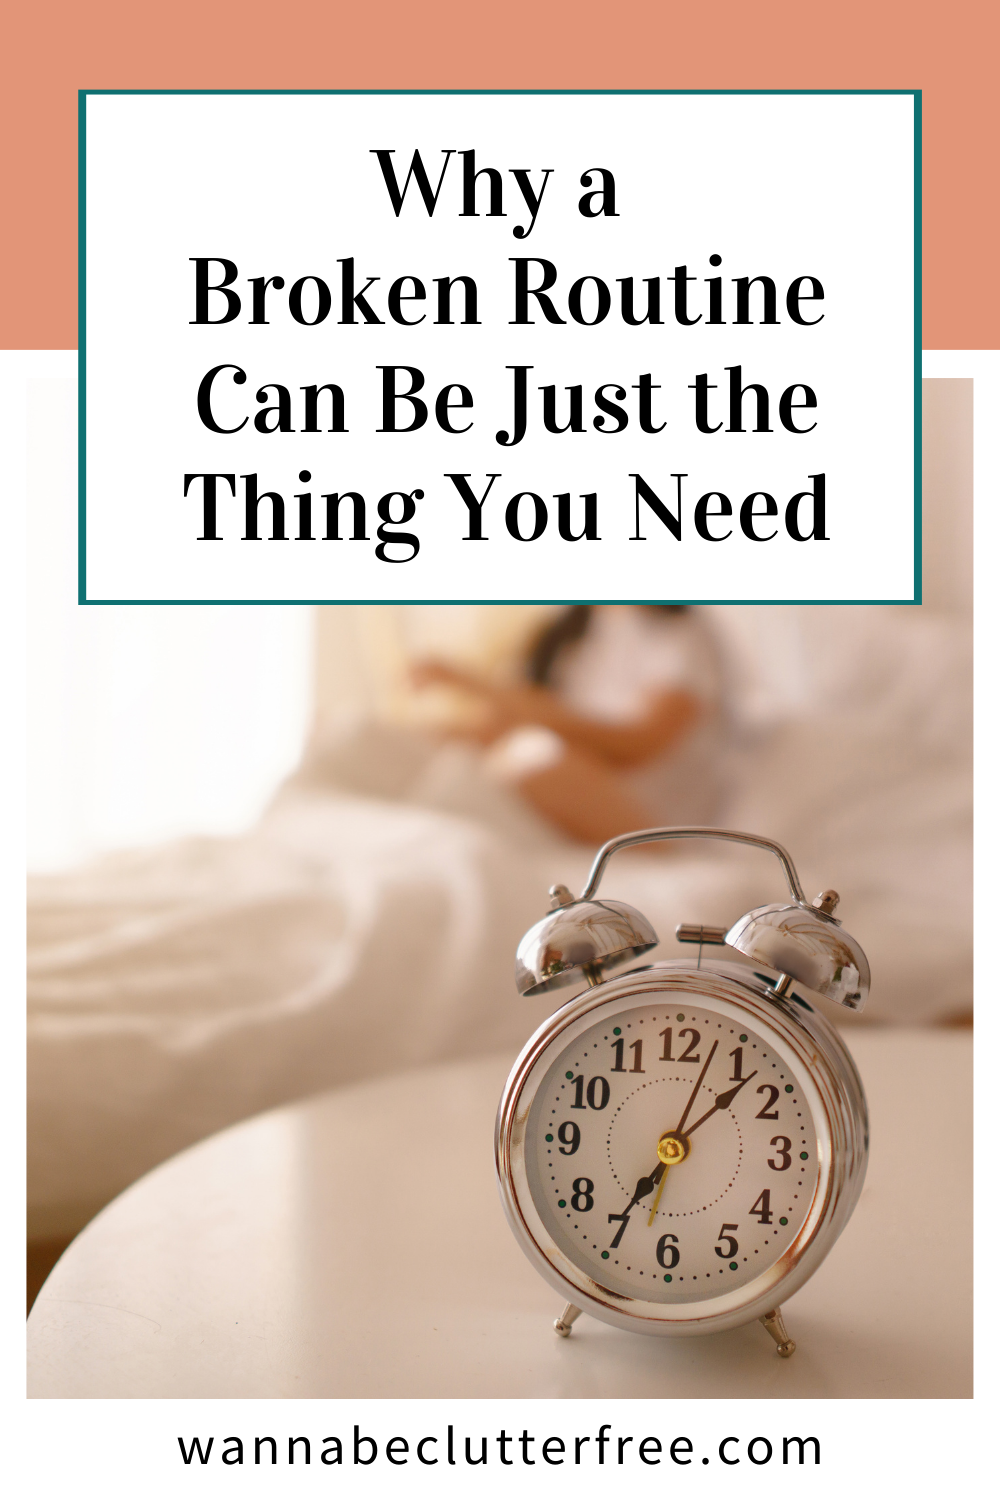 Why a Broken Routine Can Be Just the Thing You Need